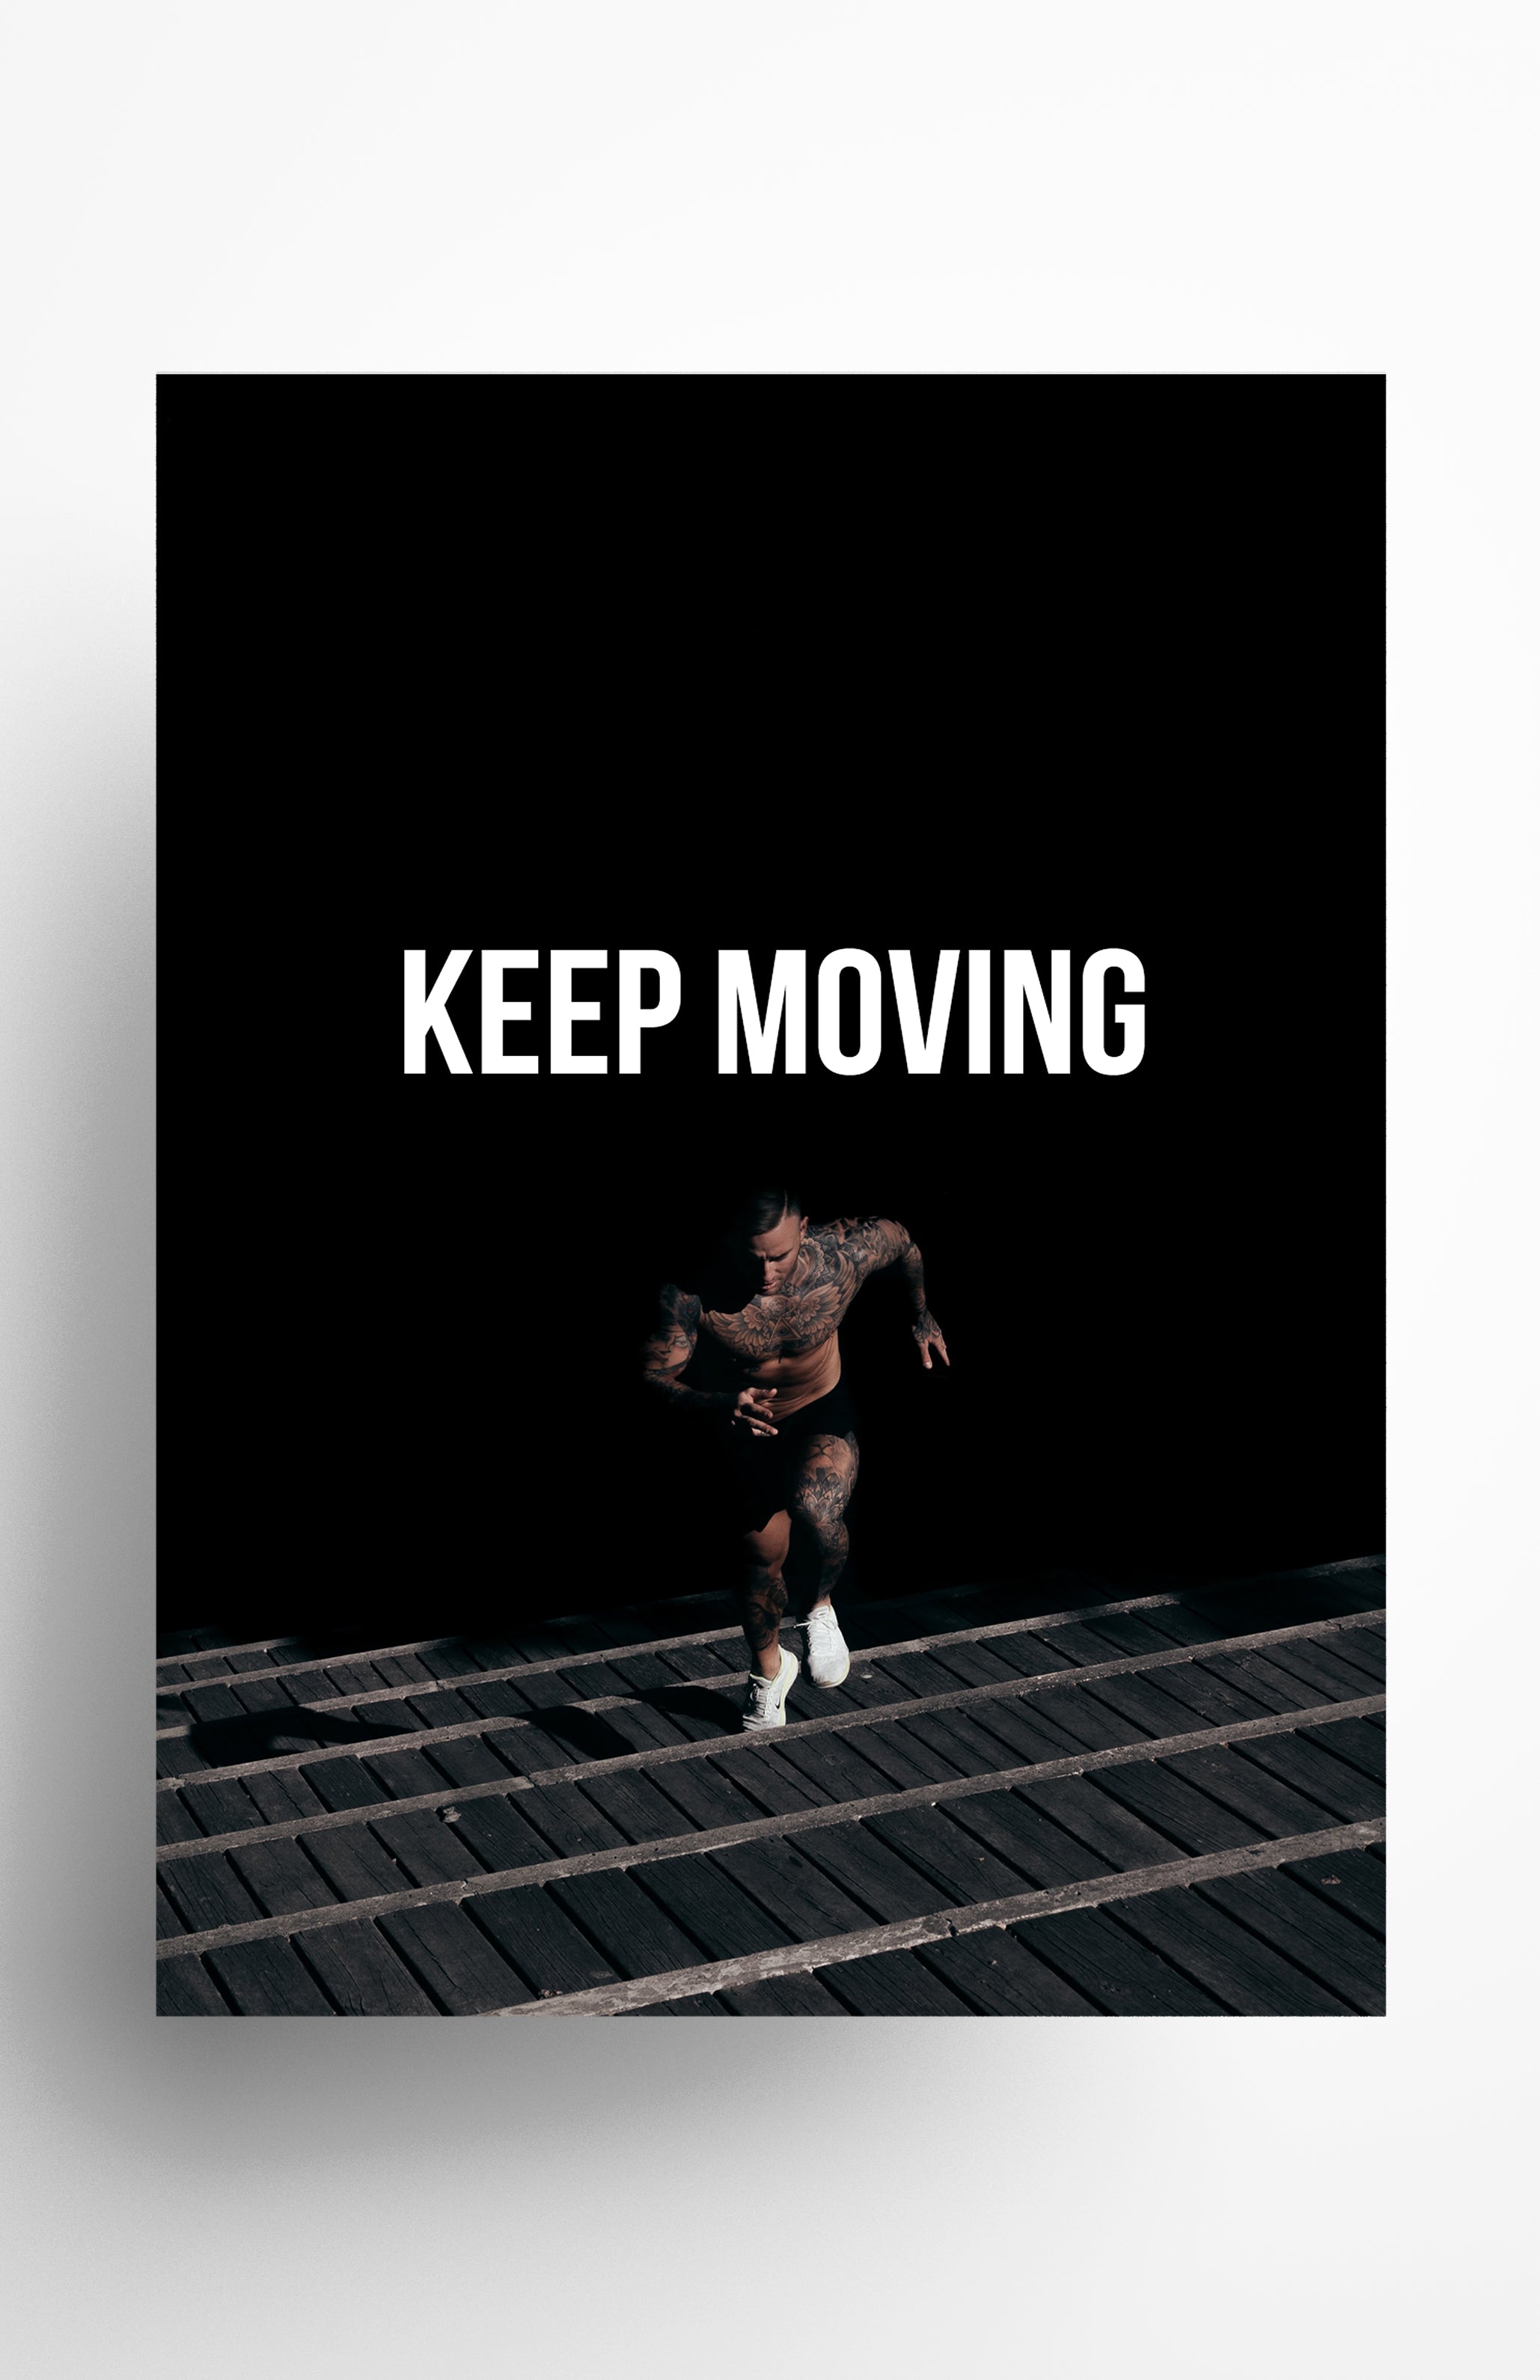 V3 Apparel womens keep moving, Motivational posters, mens inspirational wall artwork and empowering poster quote designs for office, home gym, school, kitchen and living room.